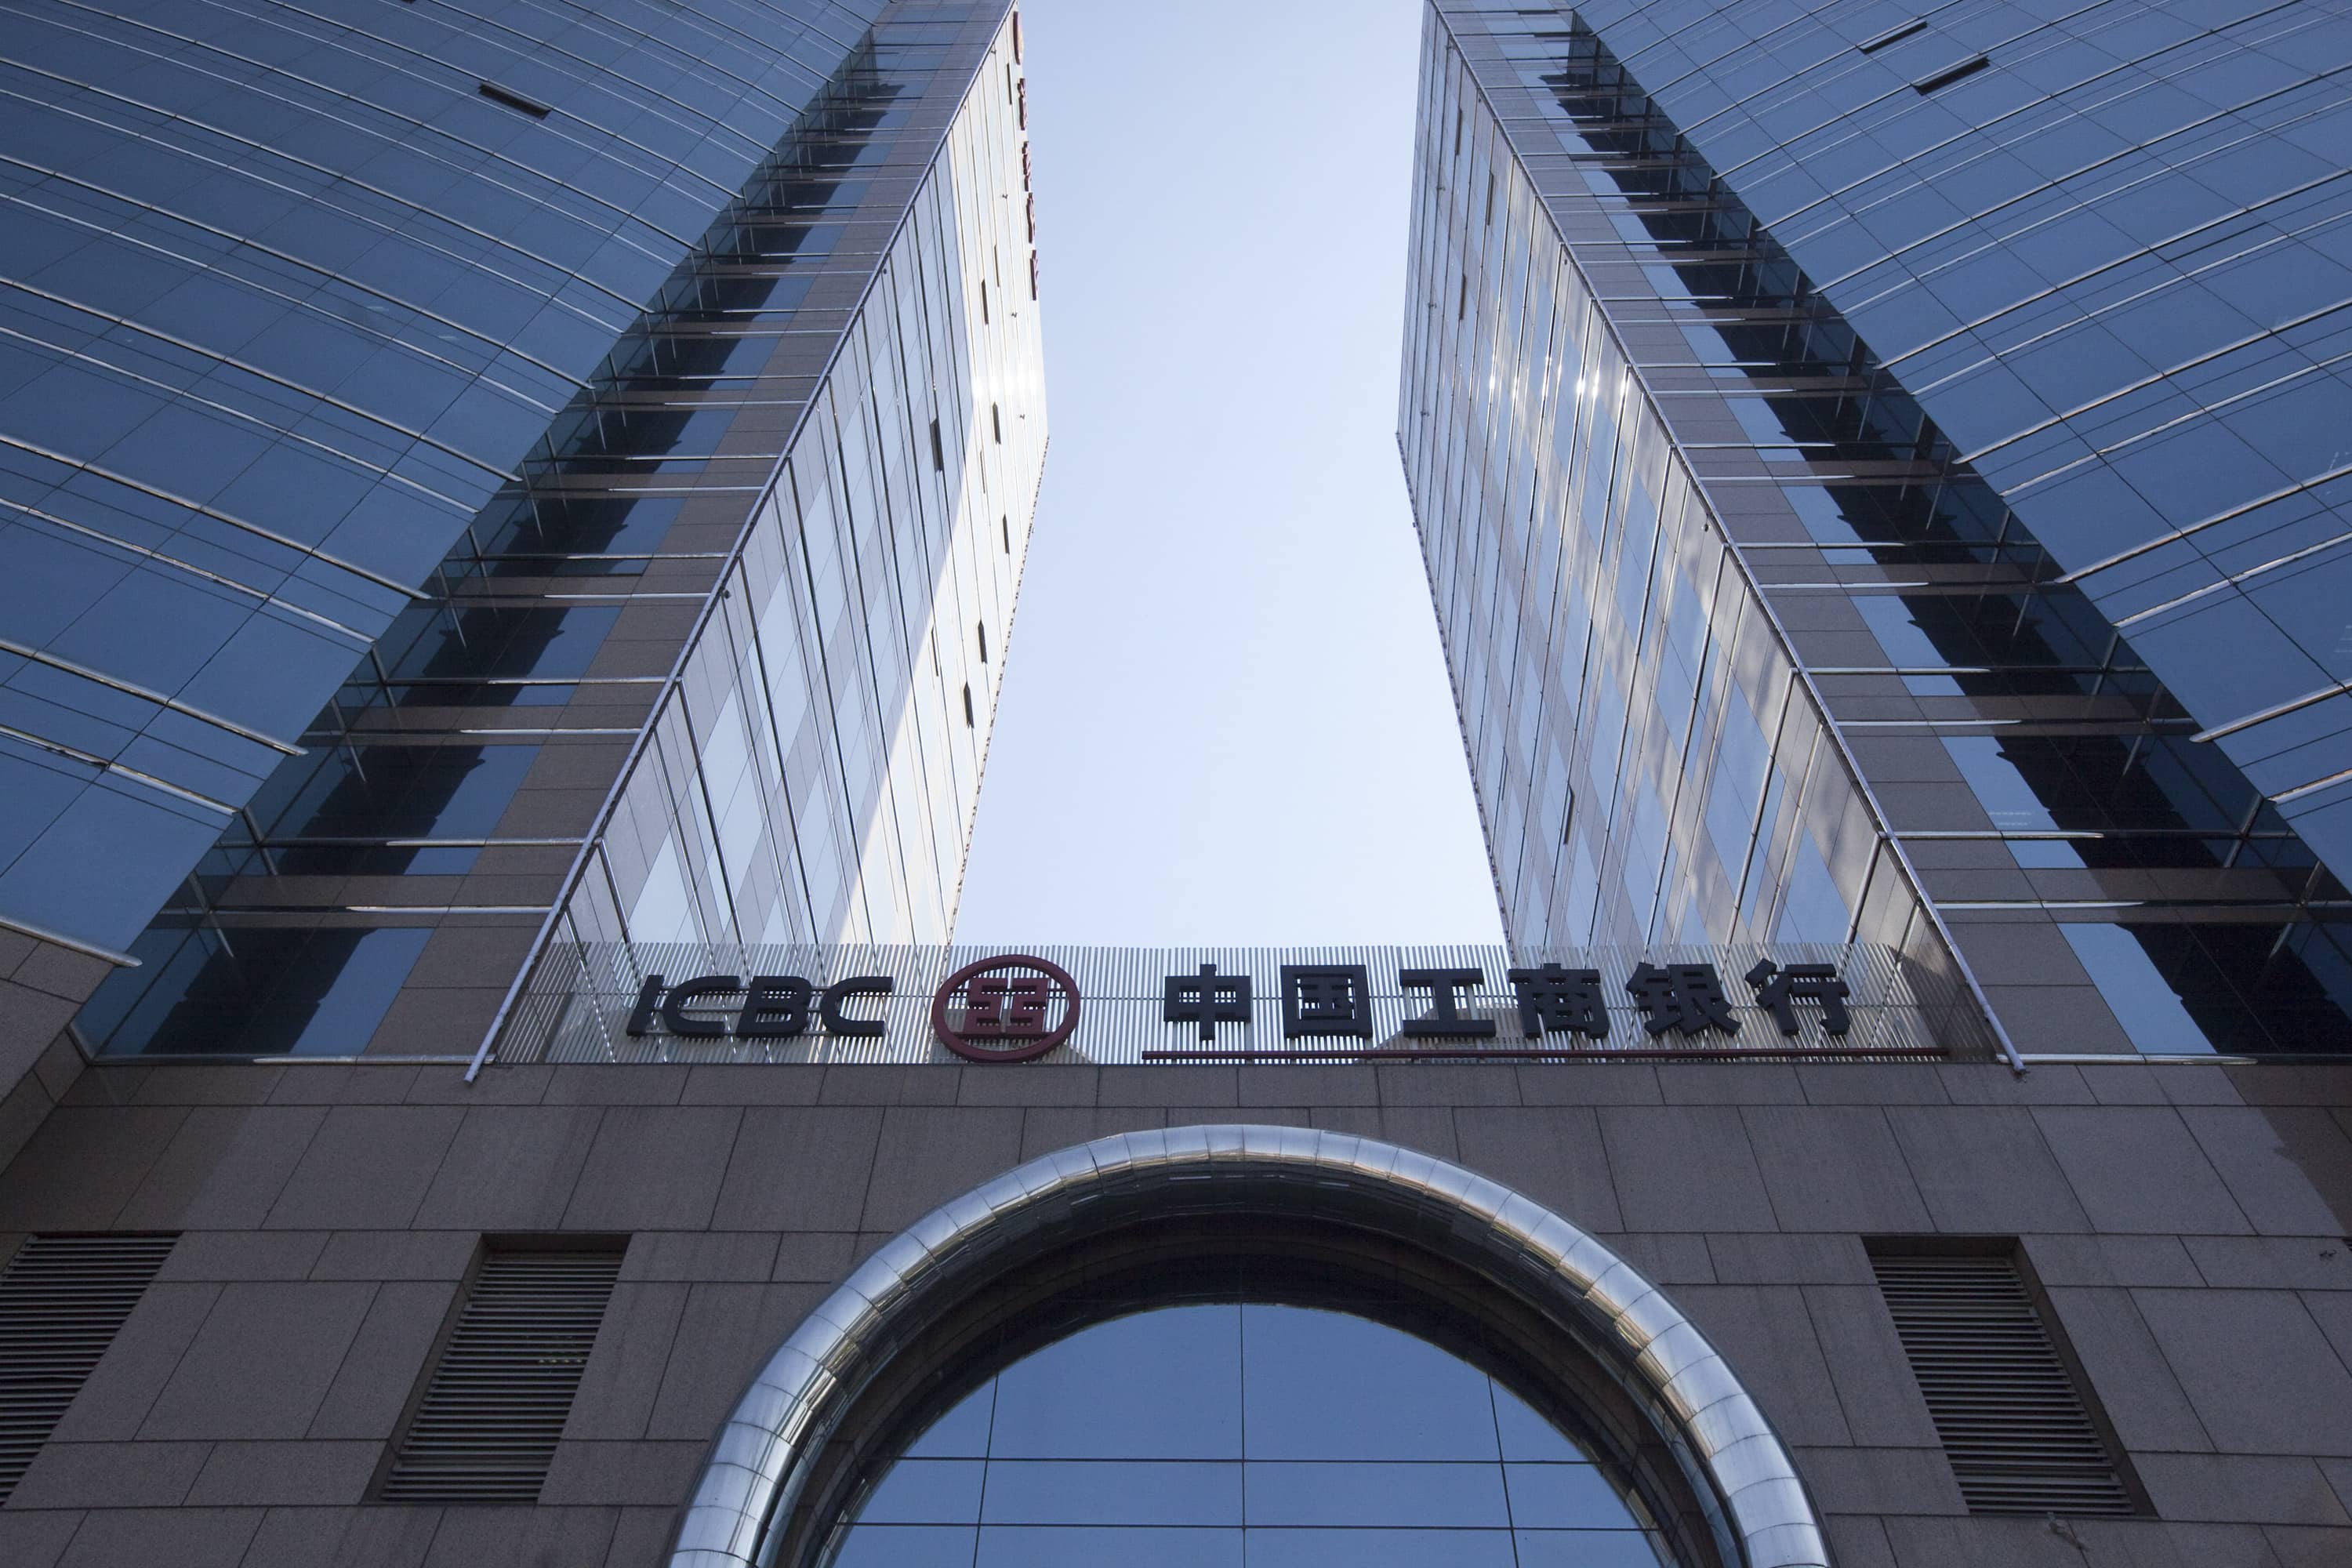 Industrial And Commercial Bank Of China